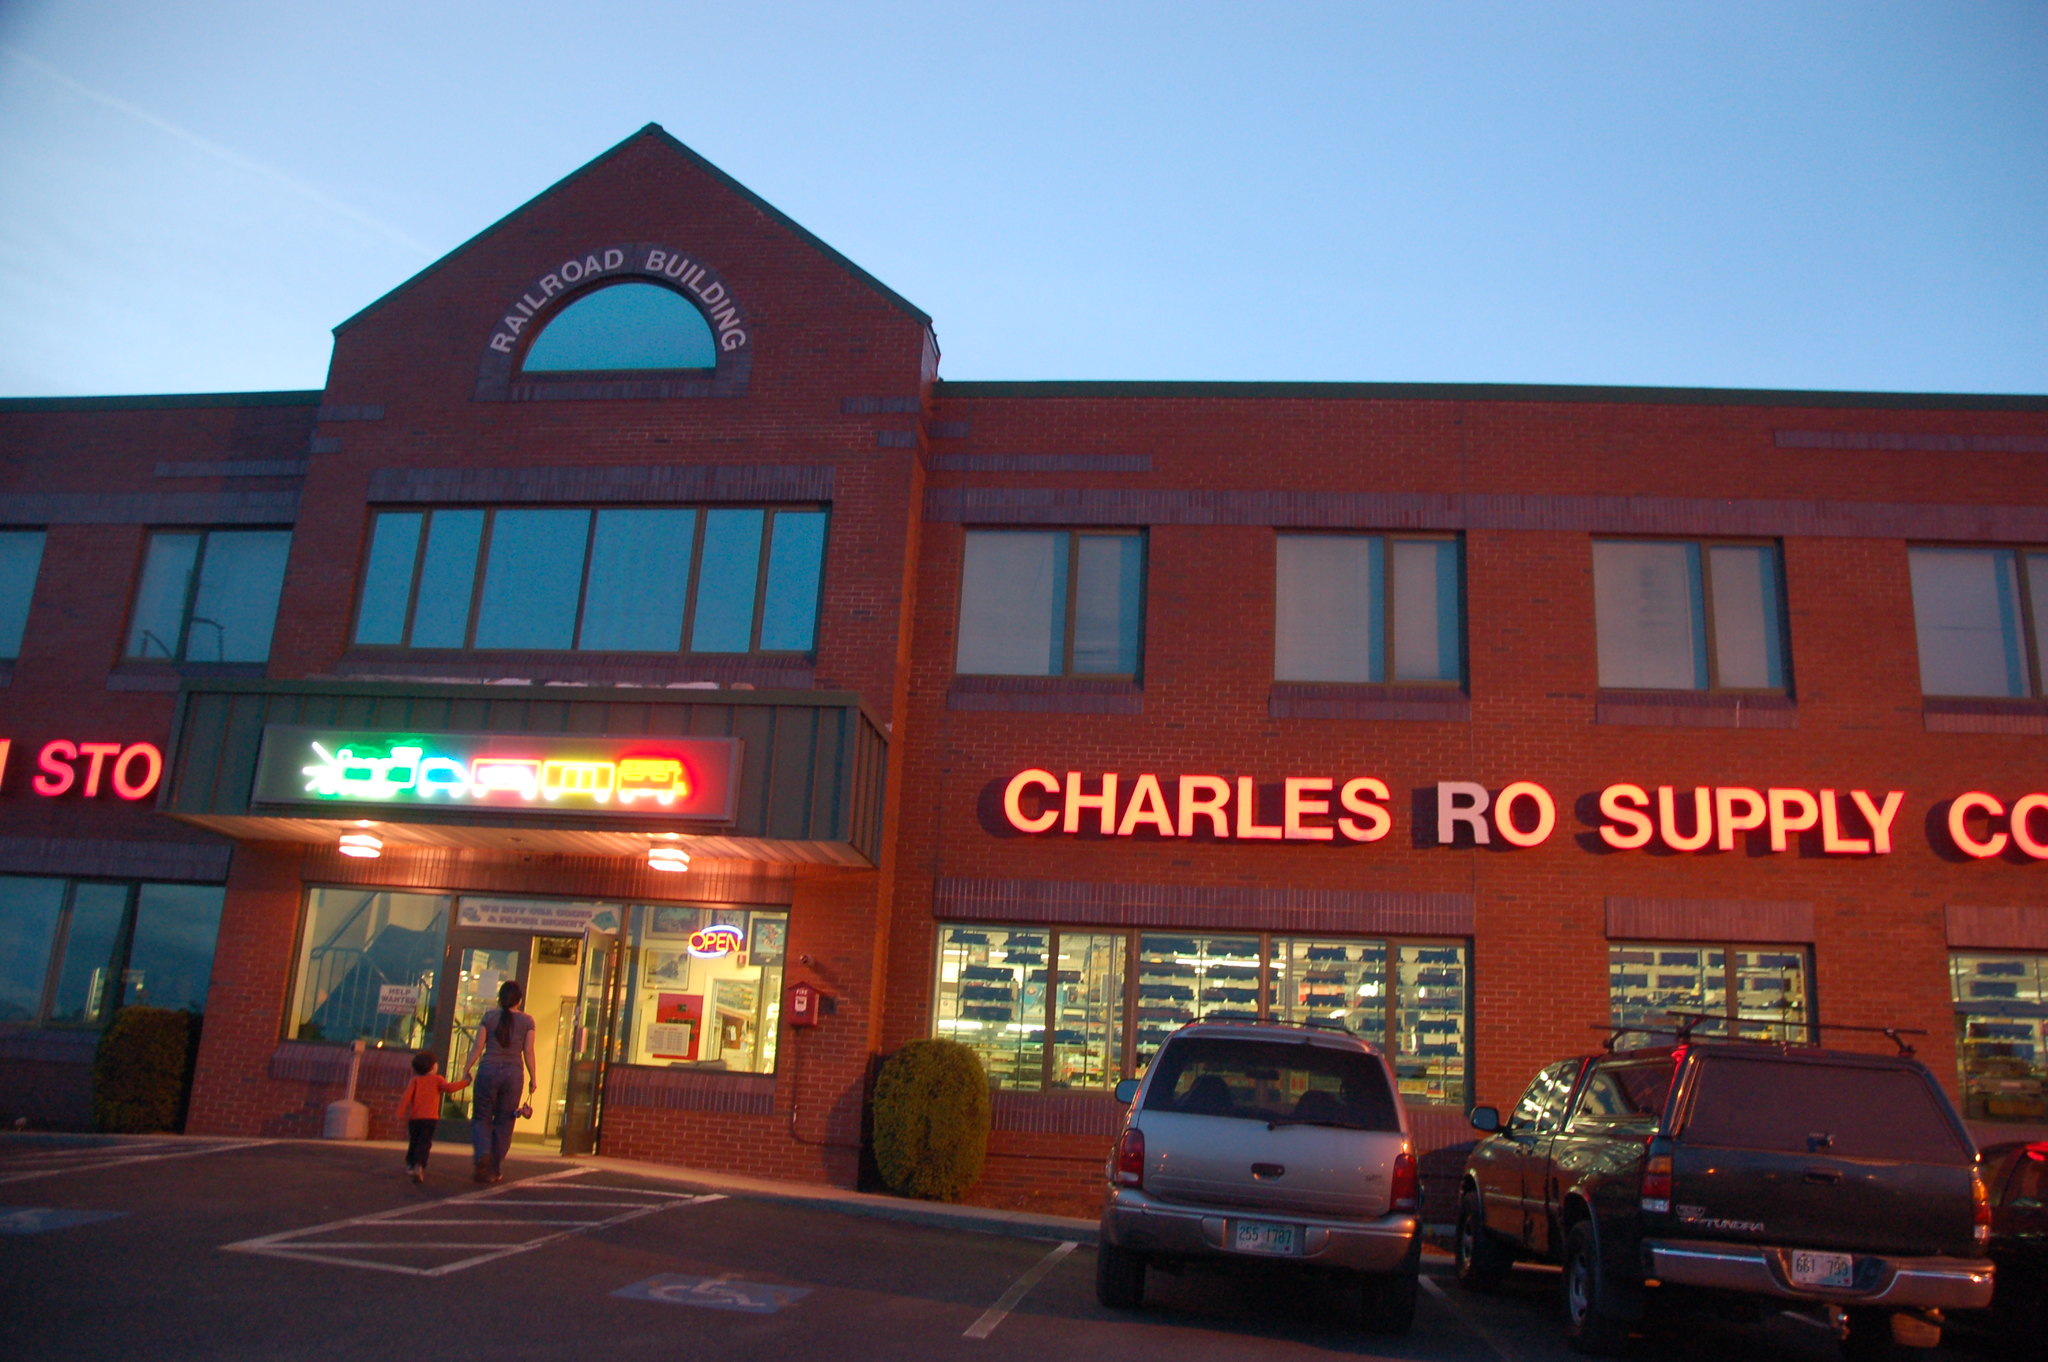 A mother with her kid heading inside one of the best toy stores in America, Charles Ro Supply Company in Malden at dusk with its signage lights turned on and cars parked outside